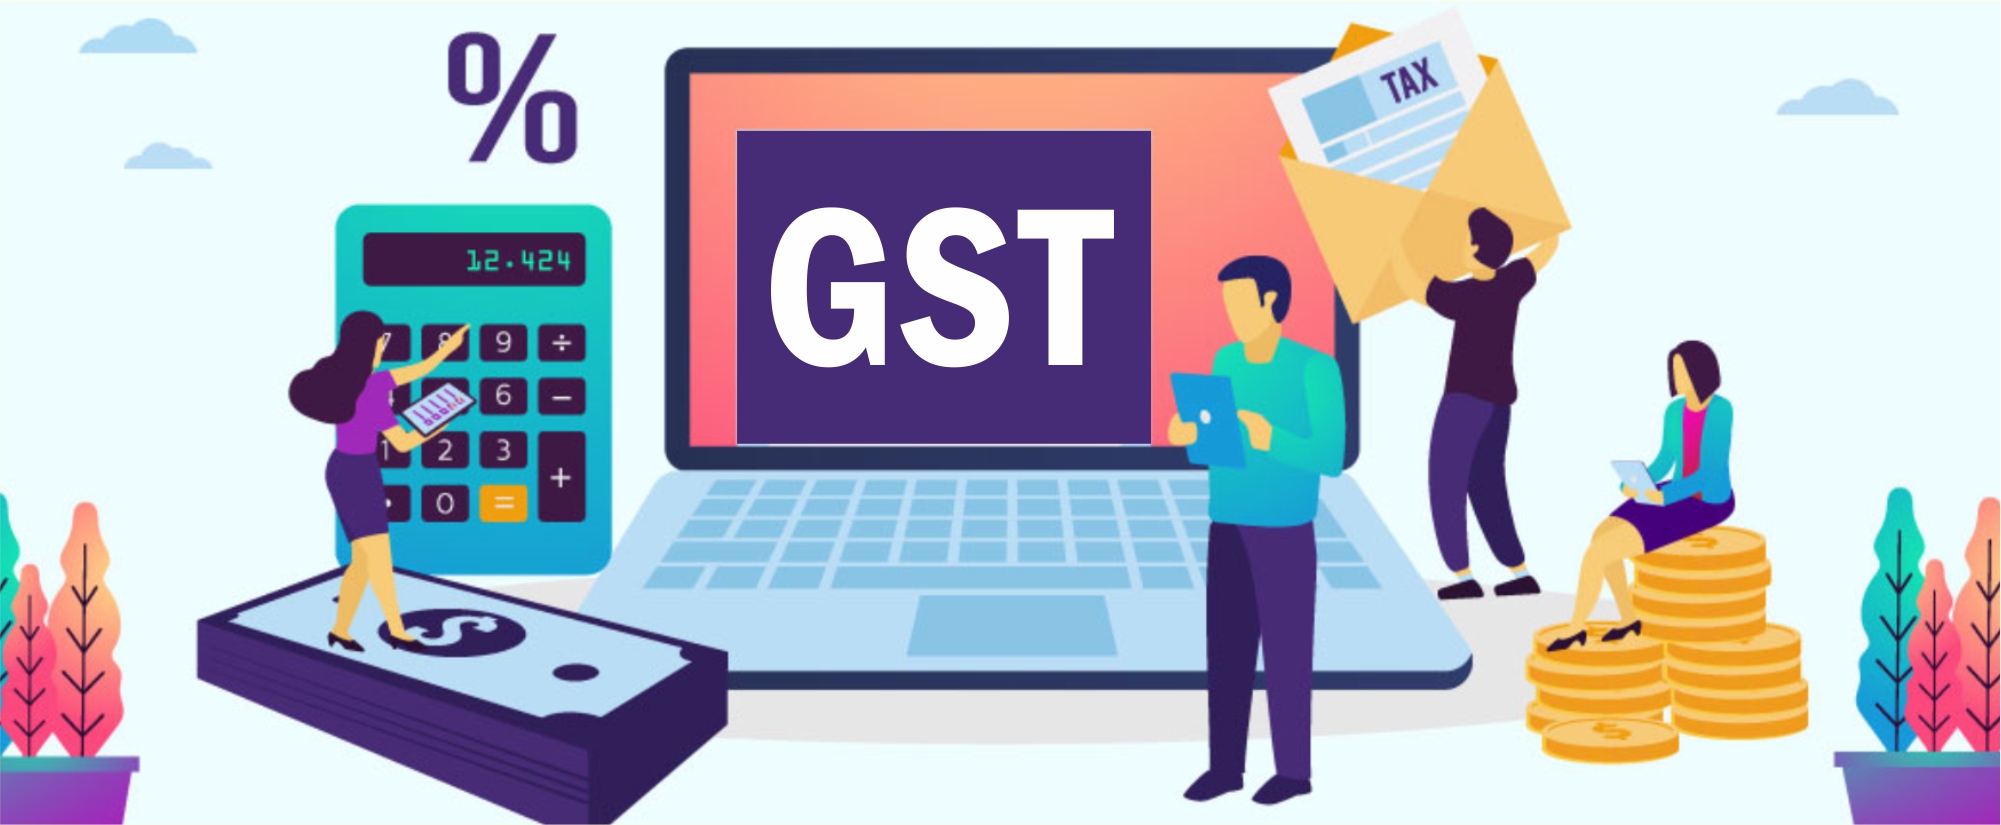 GST defaulters of last two months to be barred from filing GSTR-1